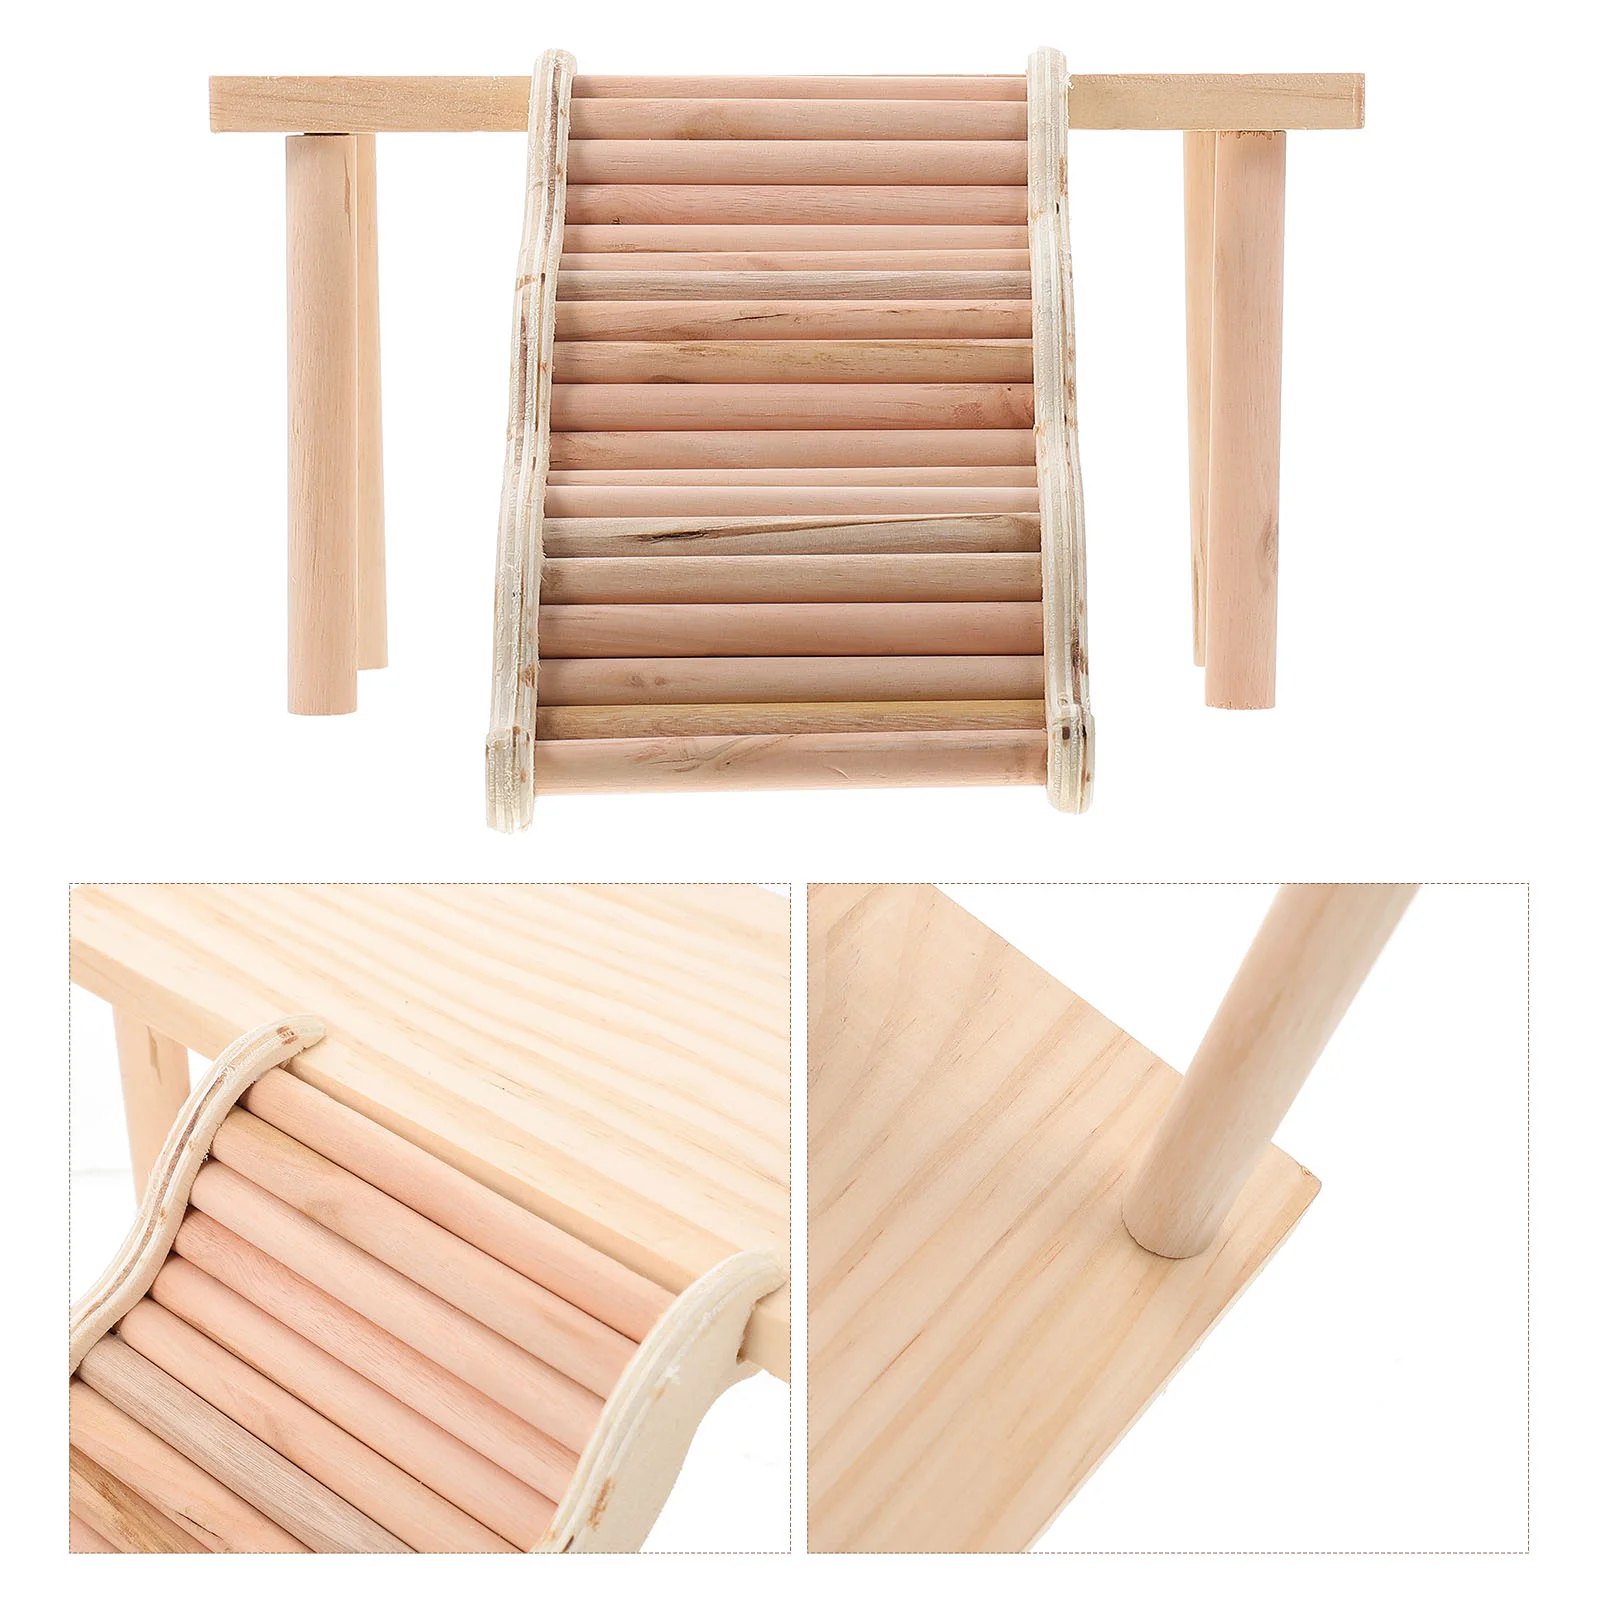 

Ladder Platform Hamster Climbing Cage Bite-resistant Anti-biting Toy Playing Wooden Guinea Accessories